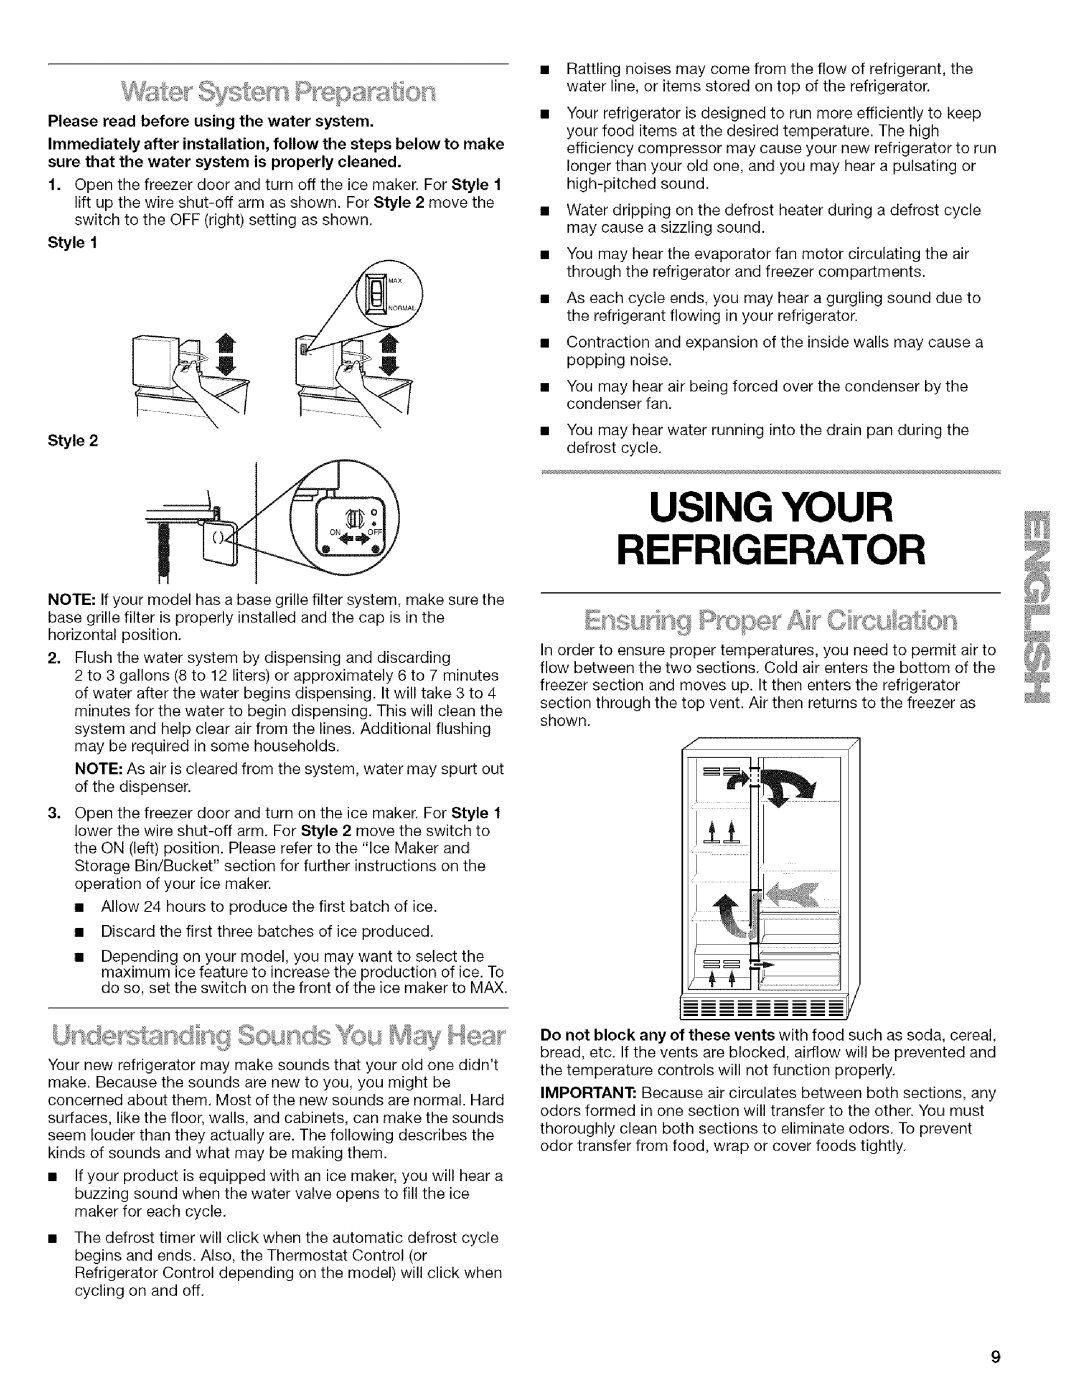 Kenmore 2205960 manual Using Your Refrigerator, Please read before using the water system, Style 